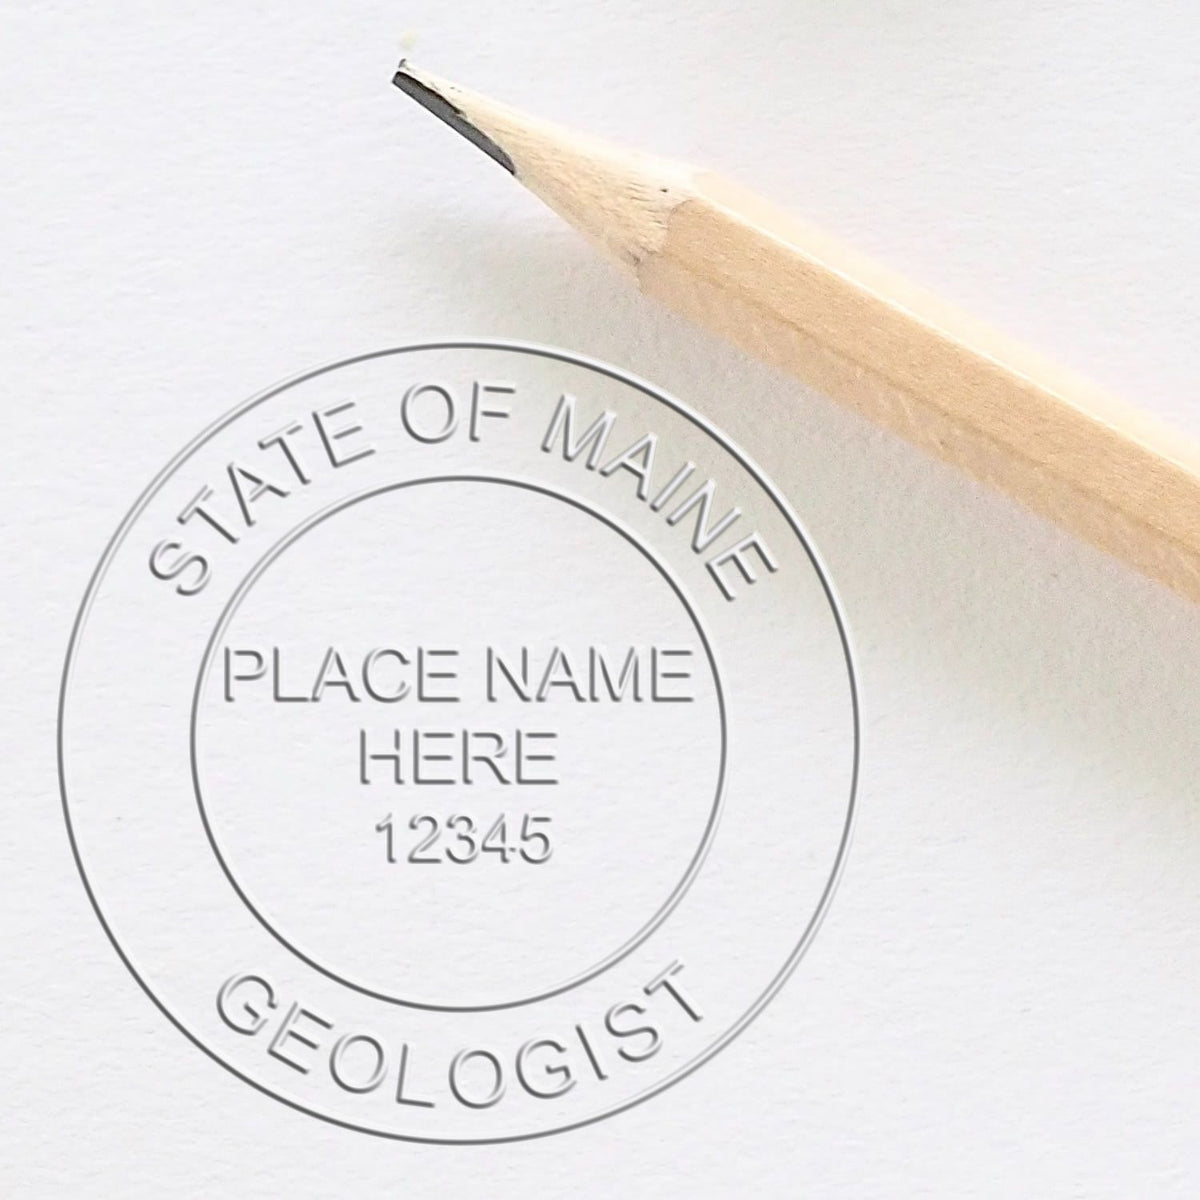 A photograph of the Gift Maine Geologist Seal stamp impression reveals a vivid, professional image of the on paper.